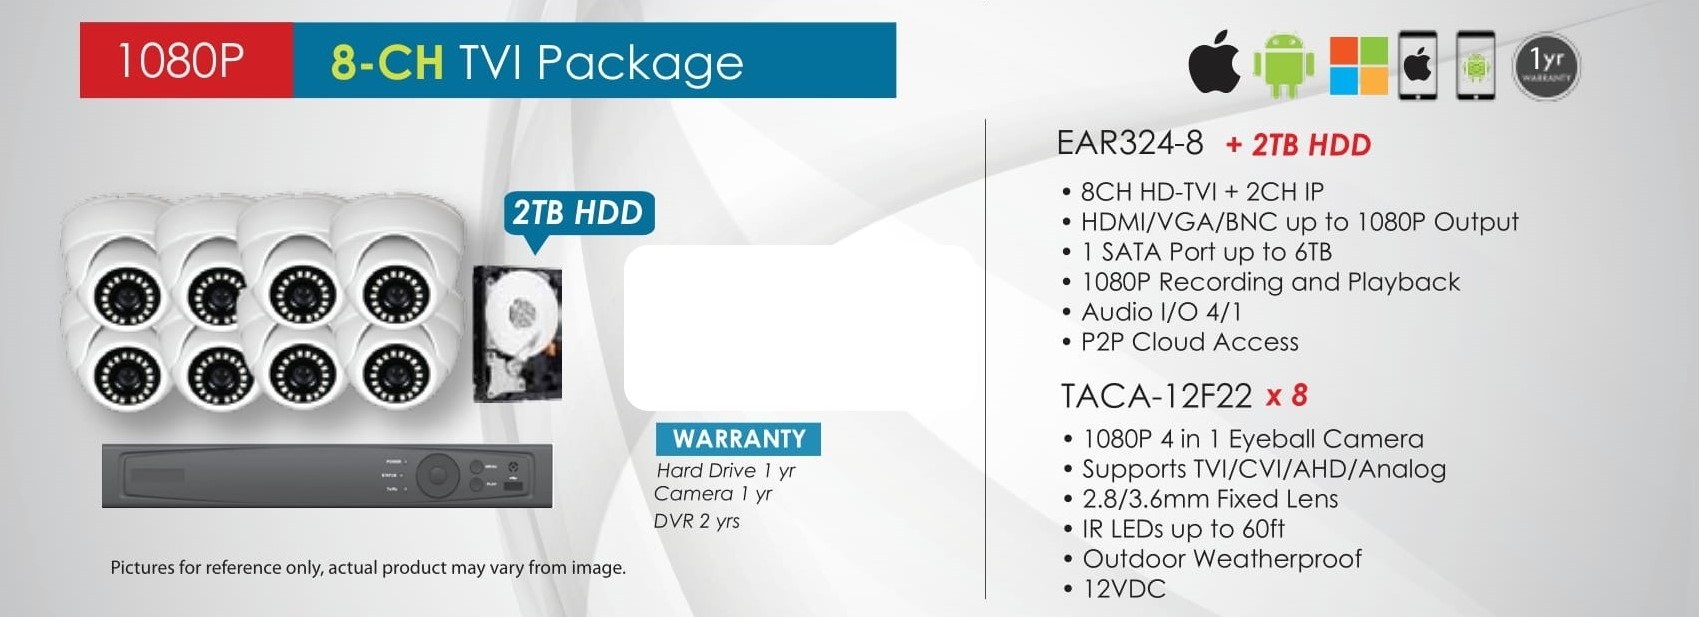 1080p-8ch-pack-1 New Packages - No Price